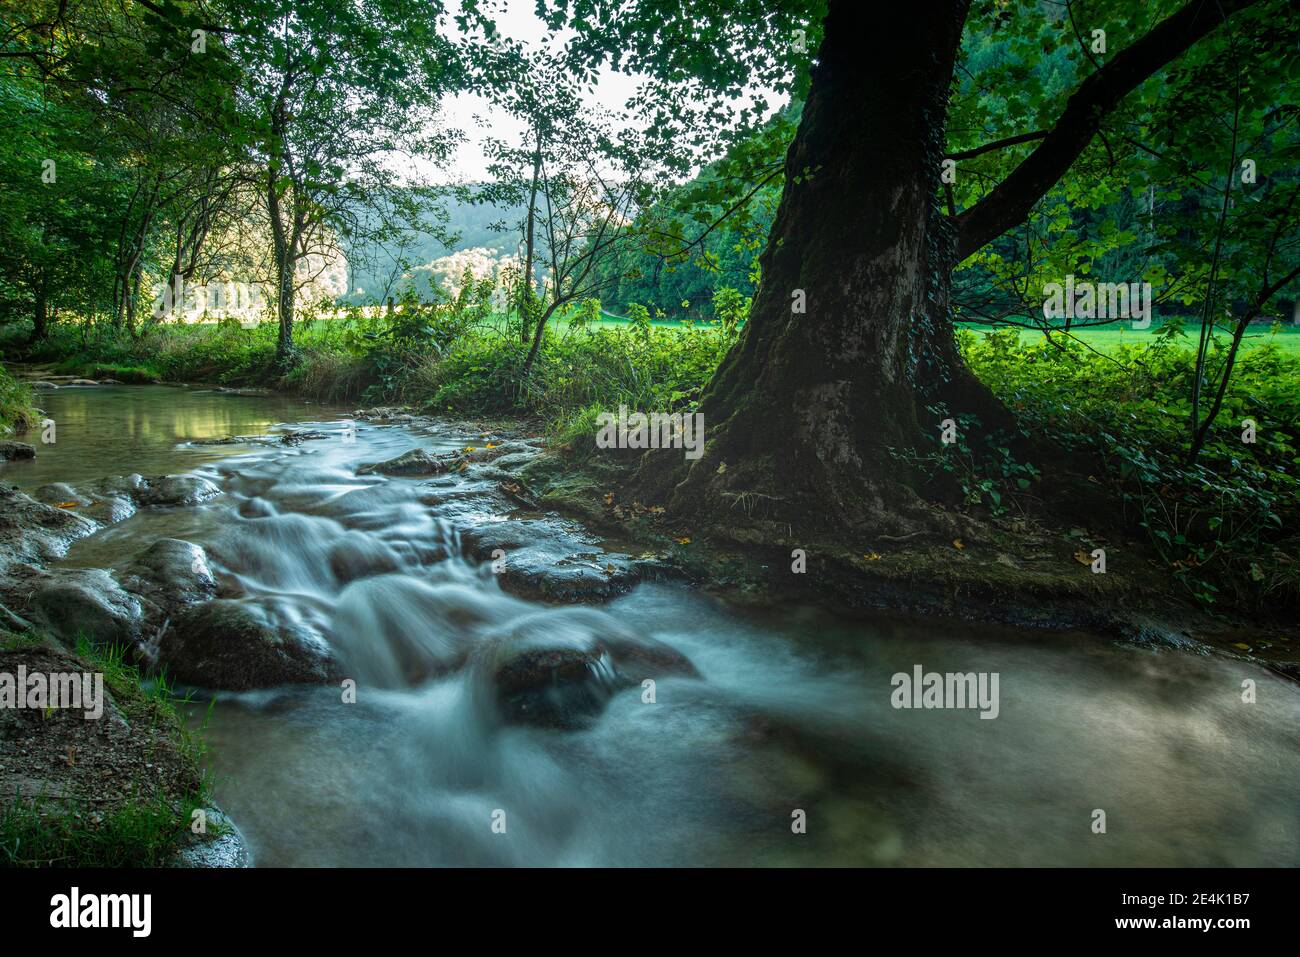 Stream amidst forest in Swabian Alb mountain, Germany Stock Photo